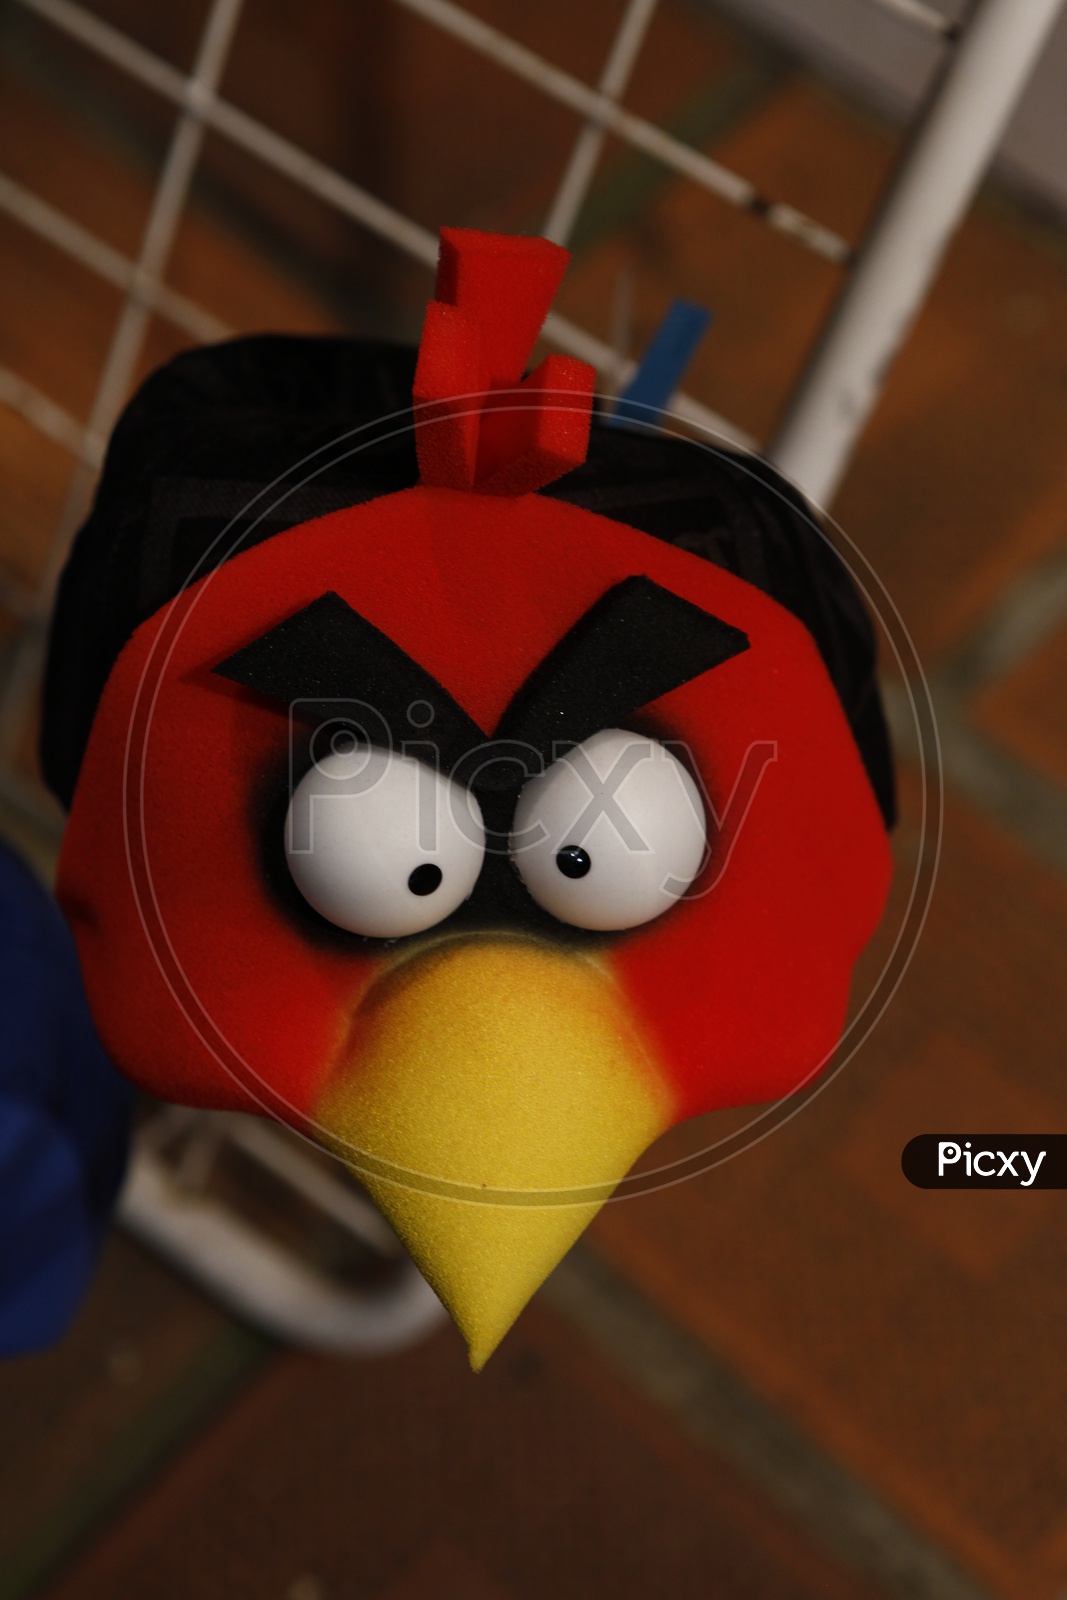 Angry bird featured small bag